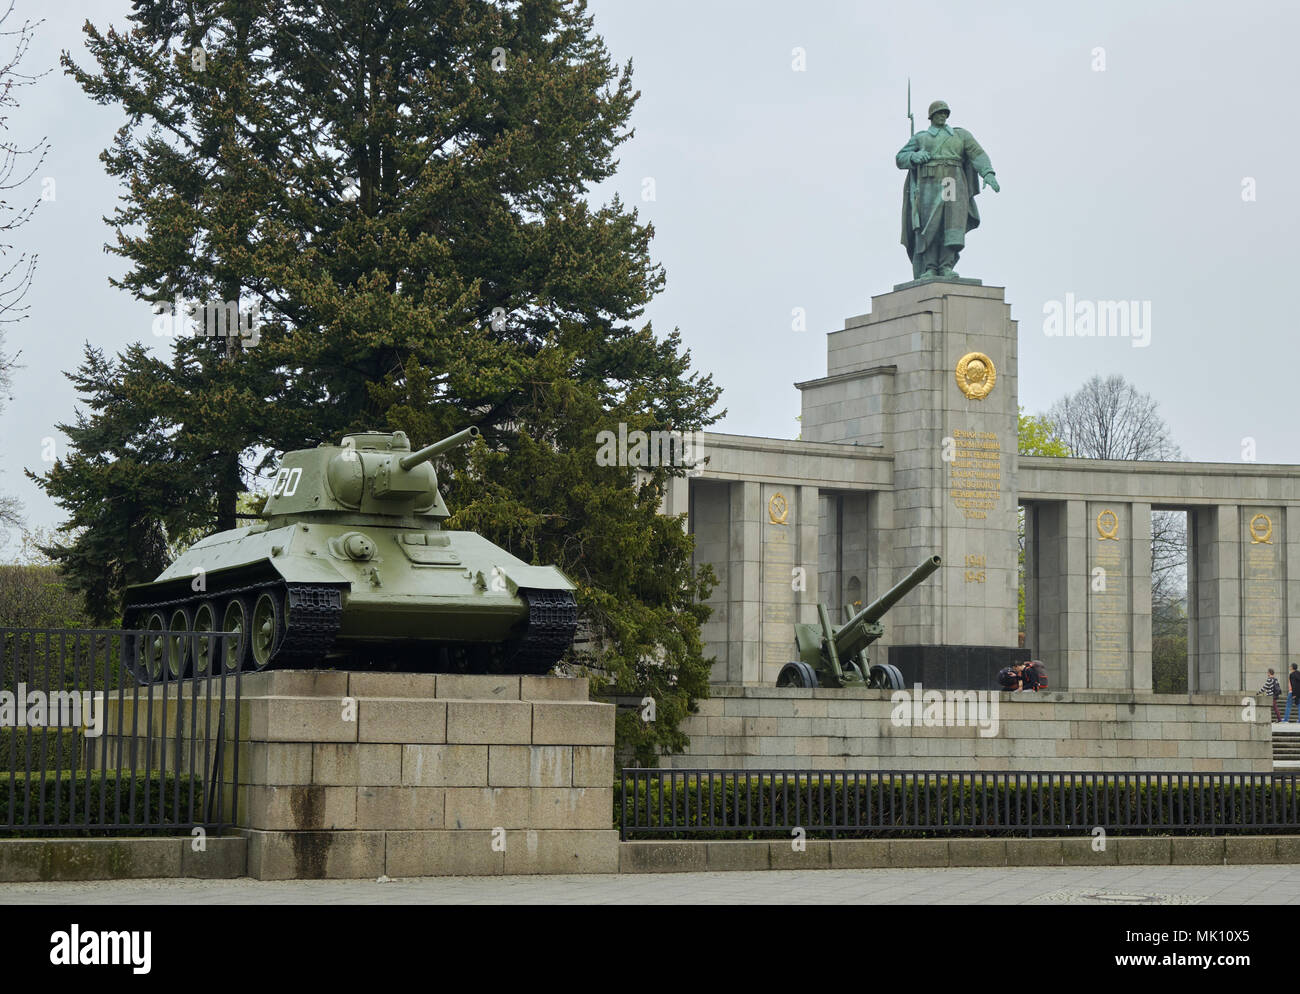 Berlin, Germany - April 14, 2018: Soviet tank T-34 and artillery cannon with statue of Soviet soldier and pine tree on background at Soviet War Memori Stock Photo